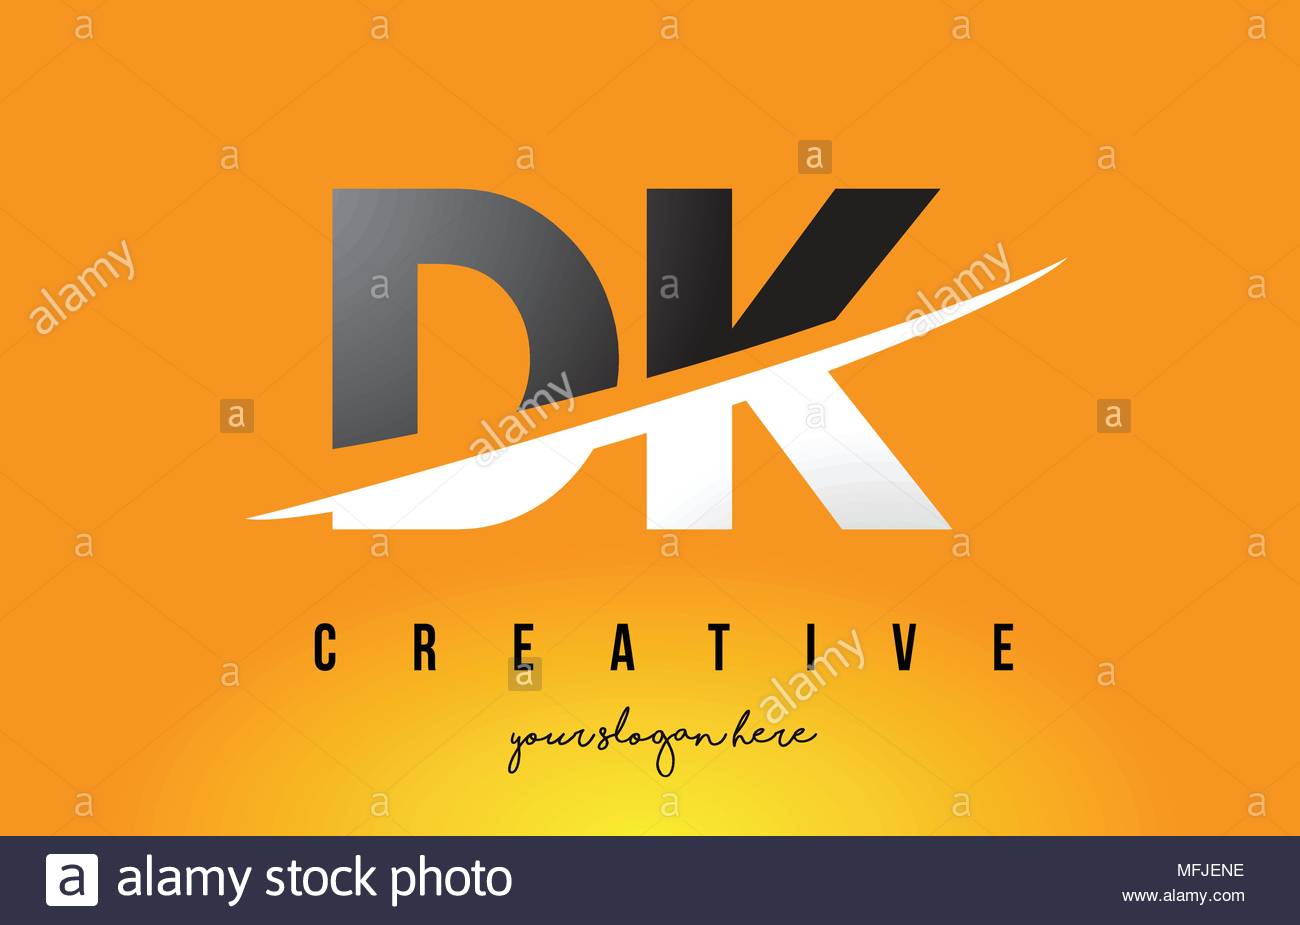 Dk Images Browse 5783 Stock Photos  Vectors Free Download with Trial   Shutterstock